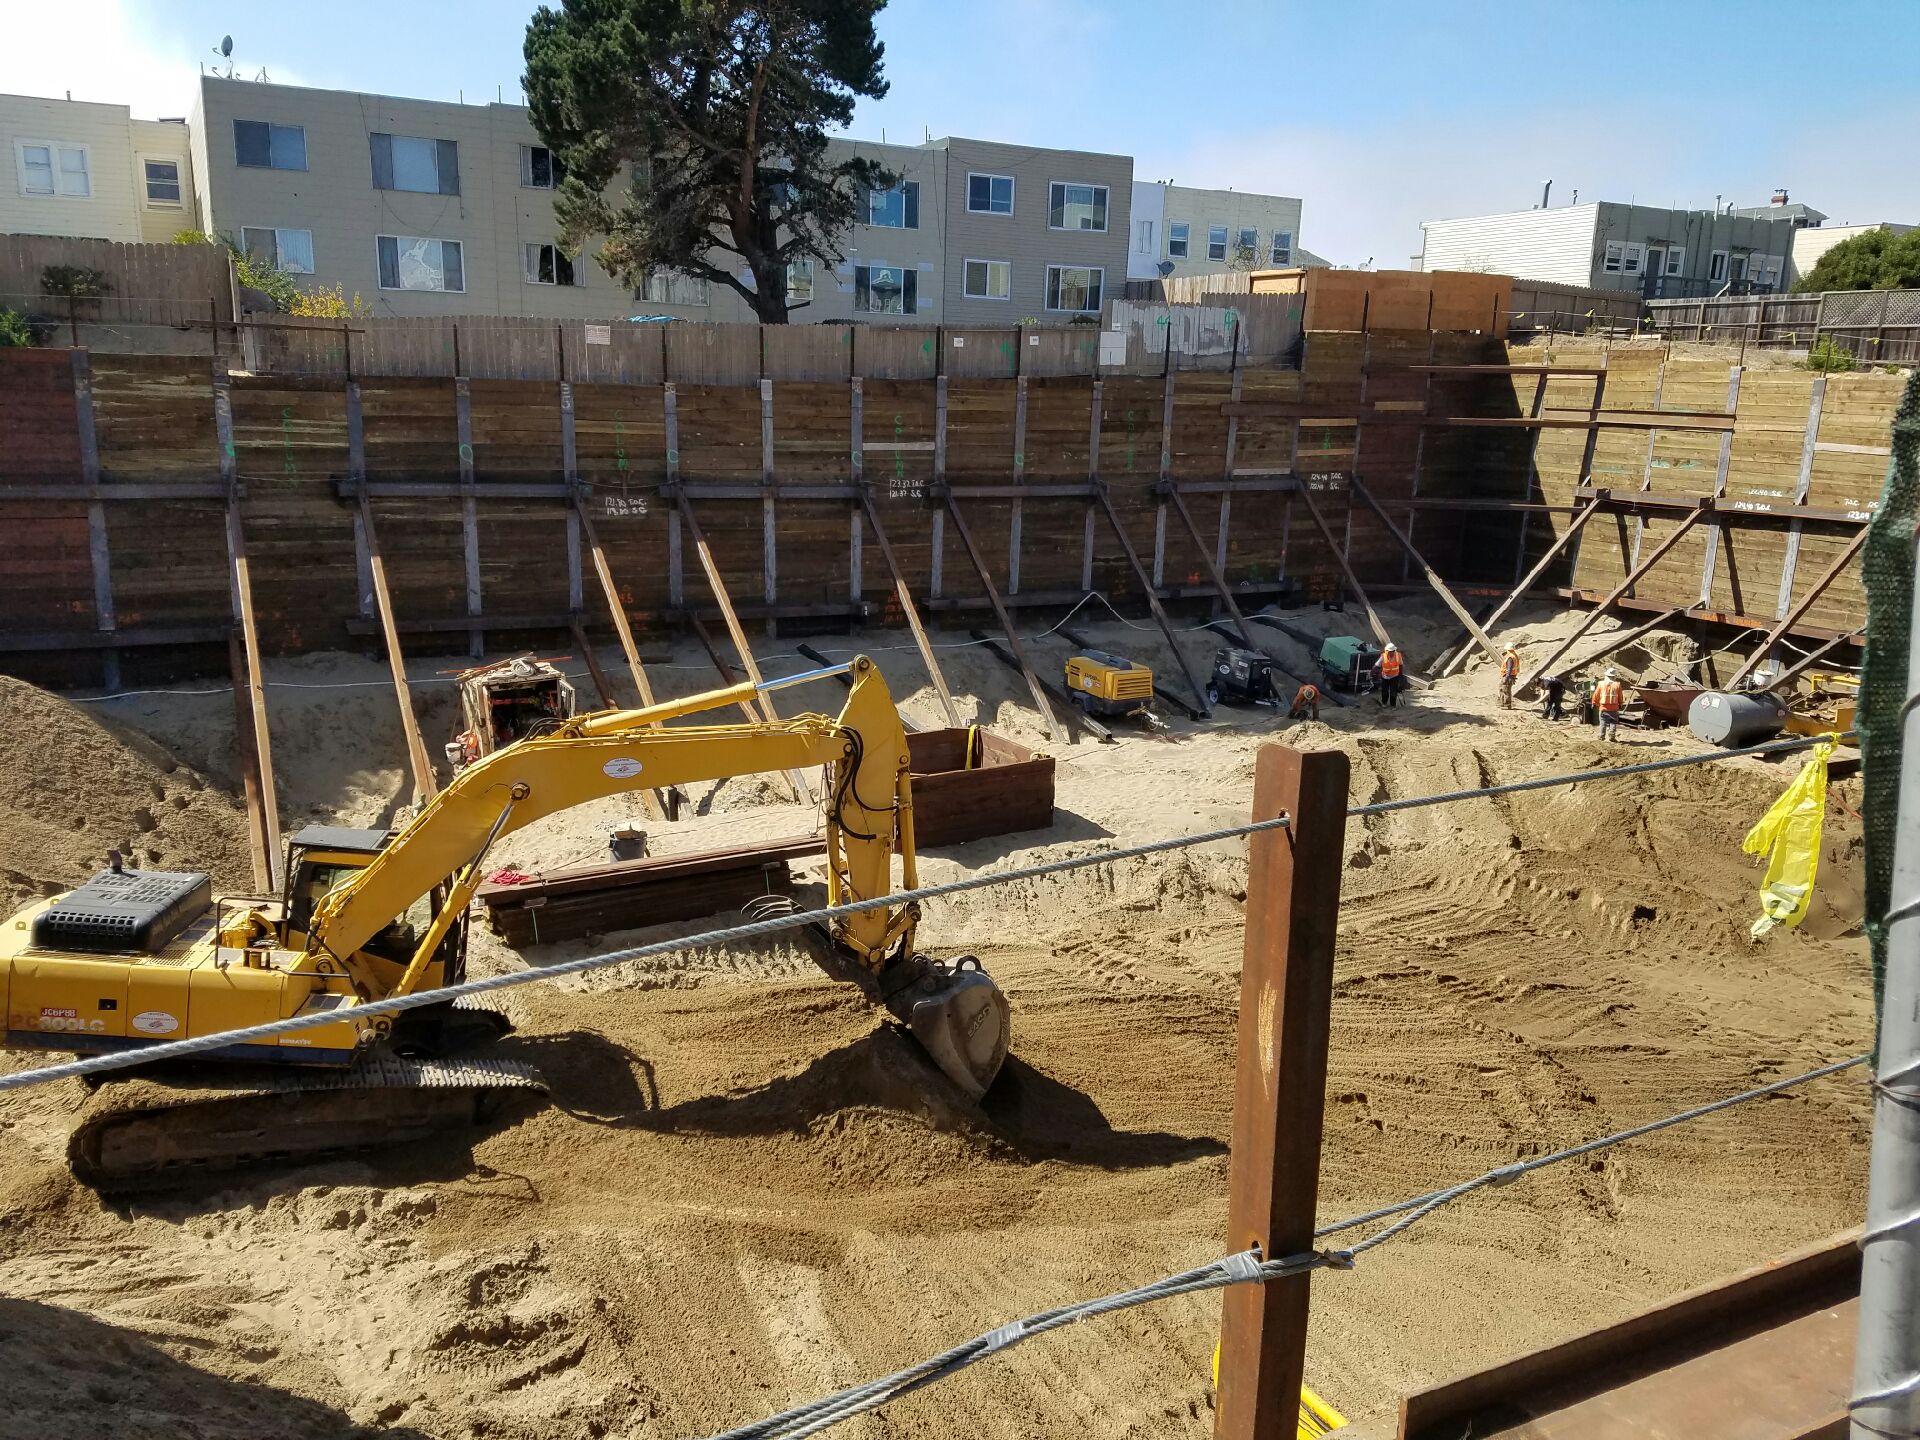 Excavation work going on at the new Alexandria Residences site